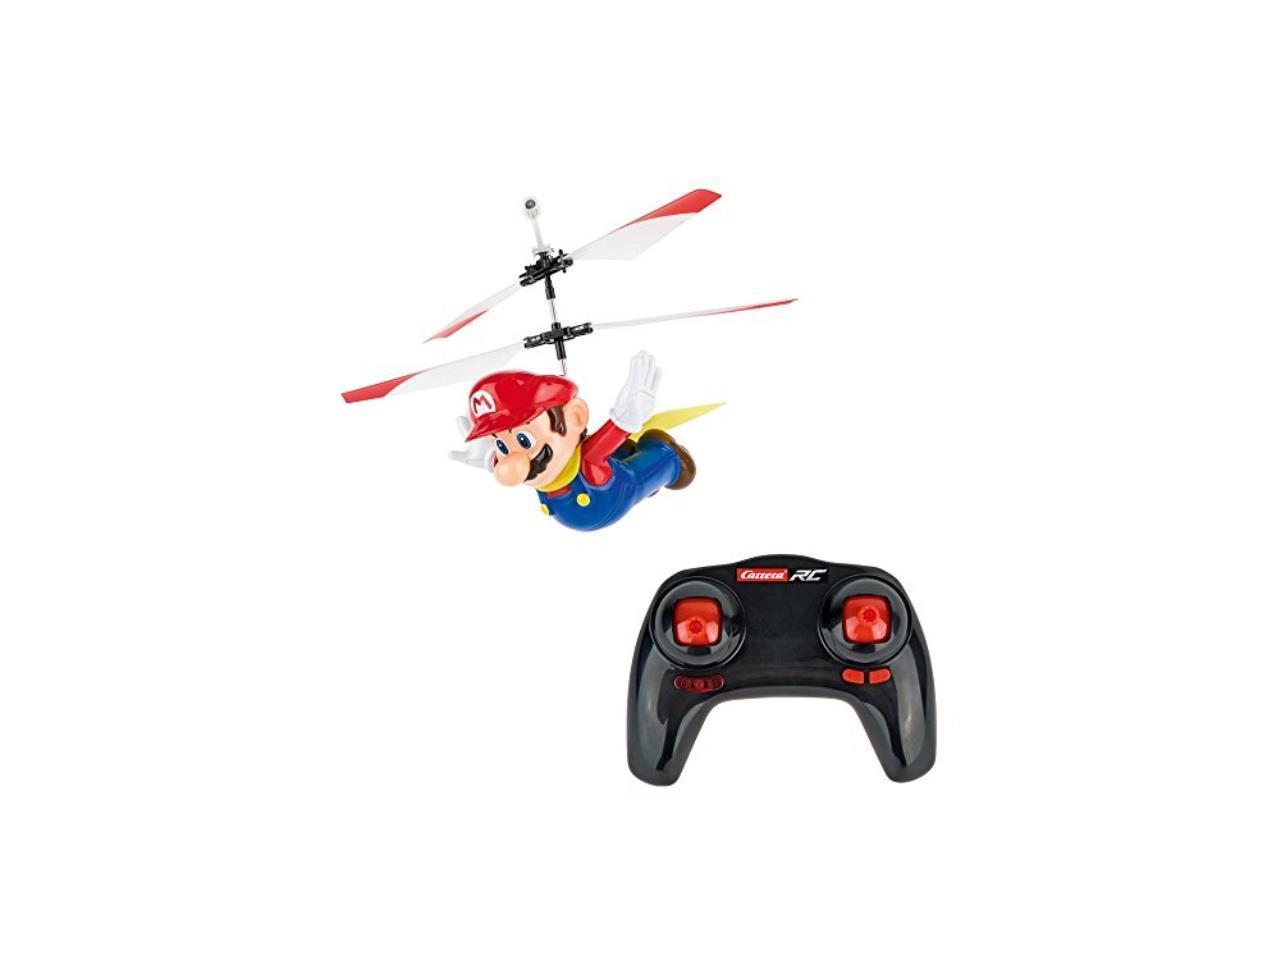 remote control helicopter and drone